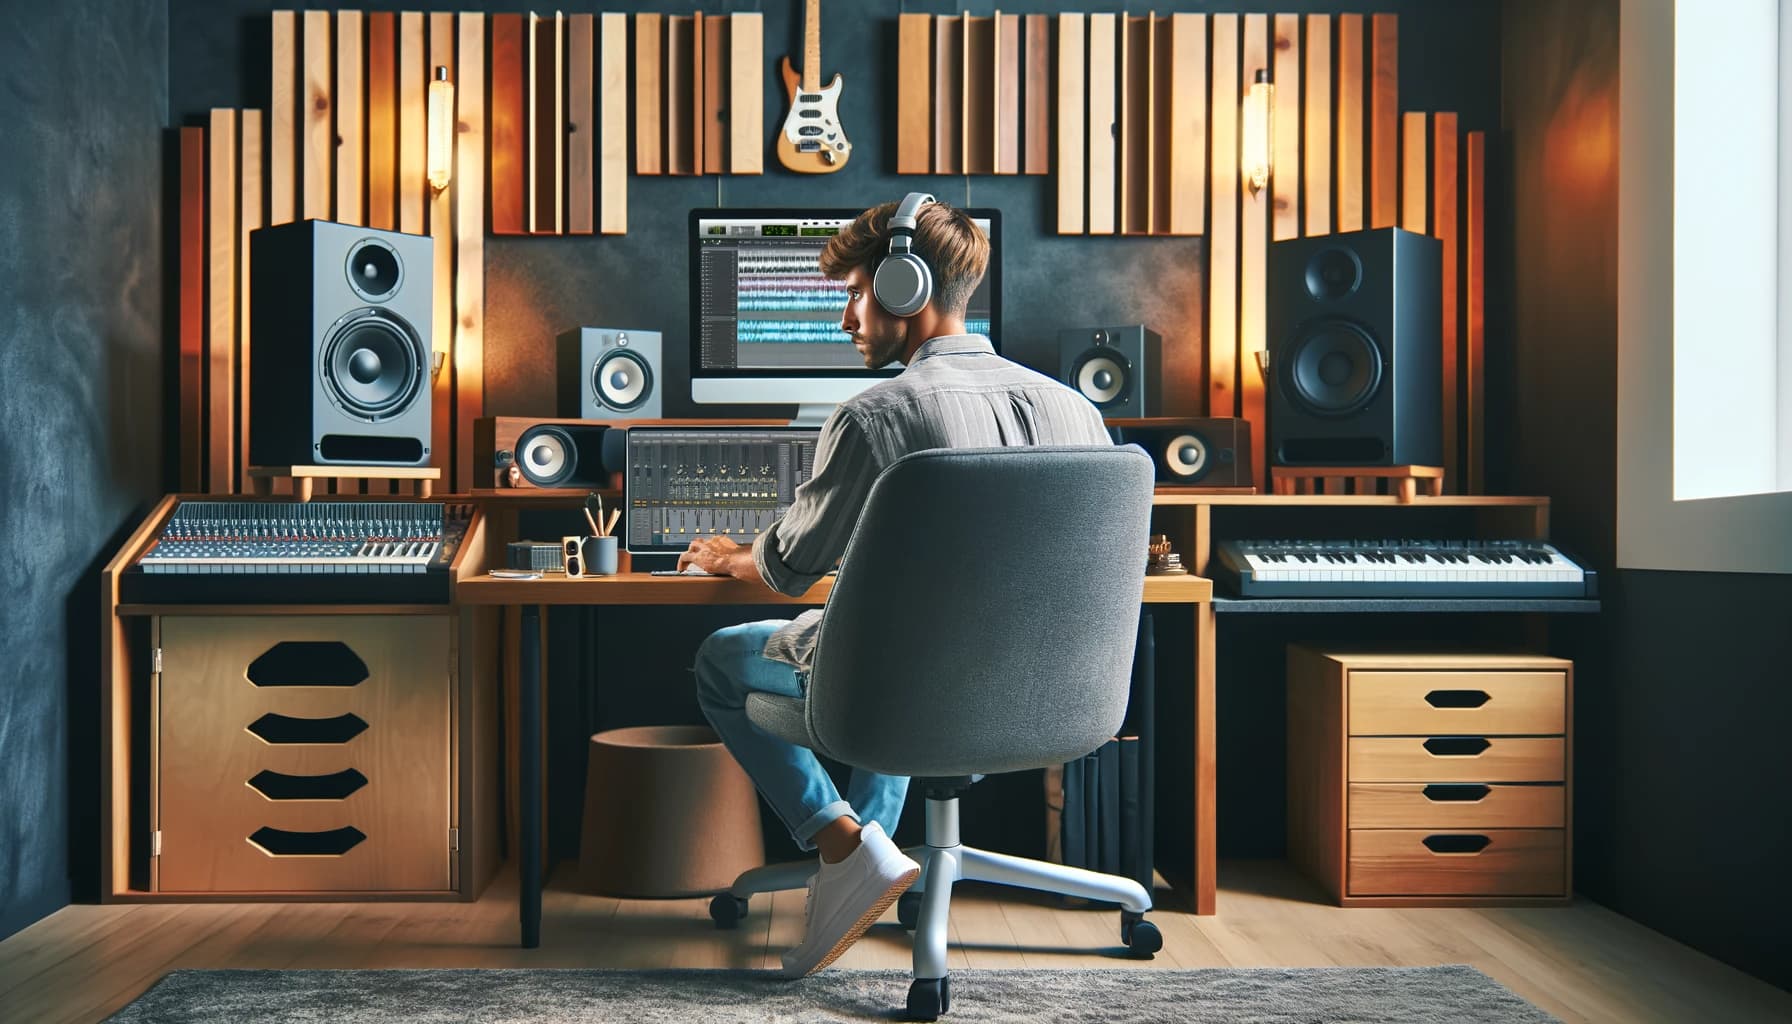 An image depicting a music producer in a modern, well-equipped home studio, intensely focused on mastering a track on his computer. The studio is ador